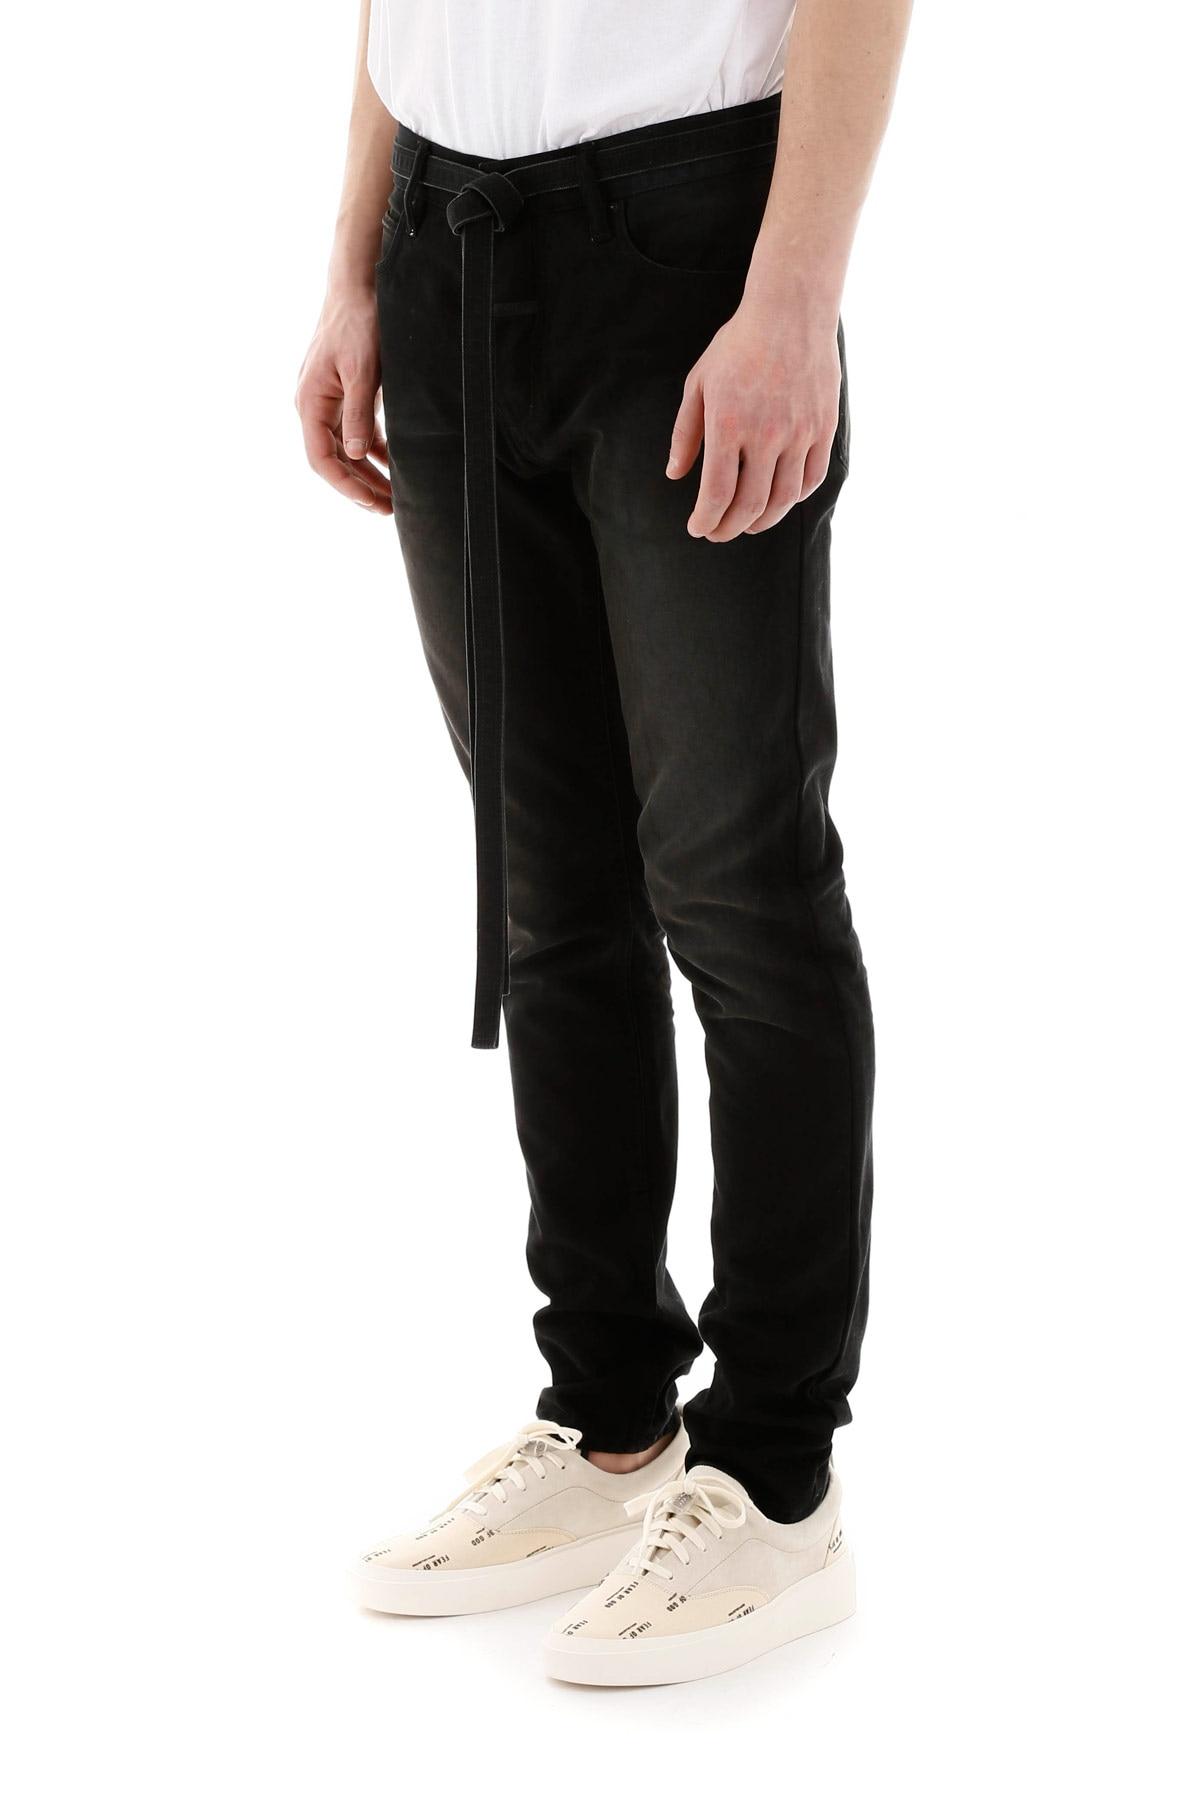 Fear Of God Denim Sixth Collection Jeans in Black for Men - Save 17% | Lyst